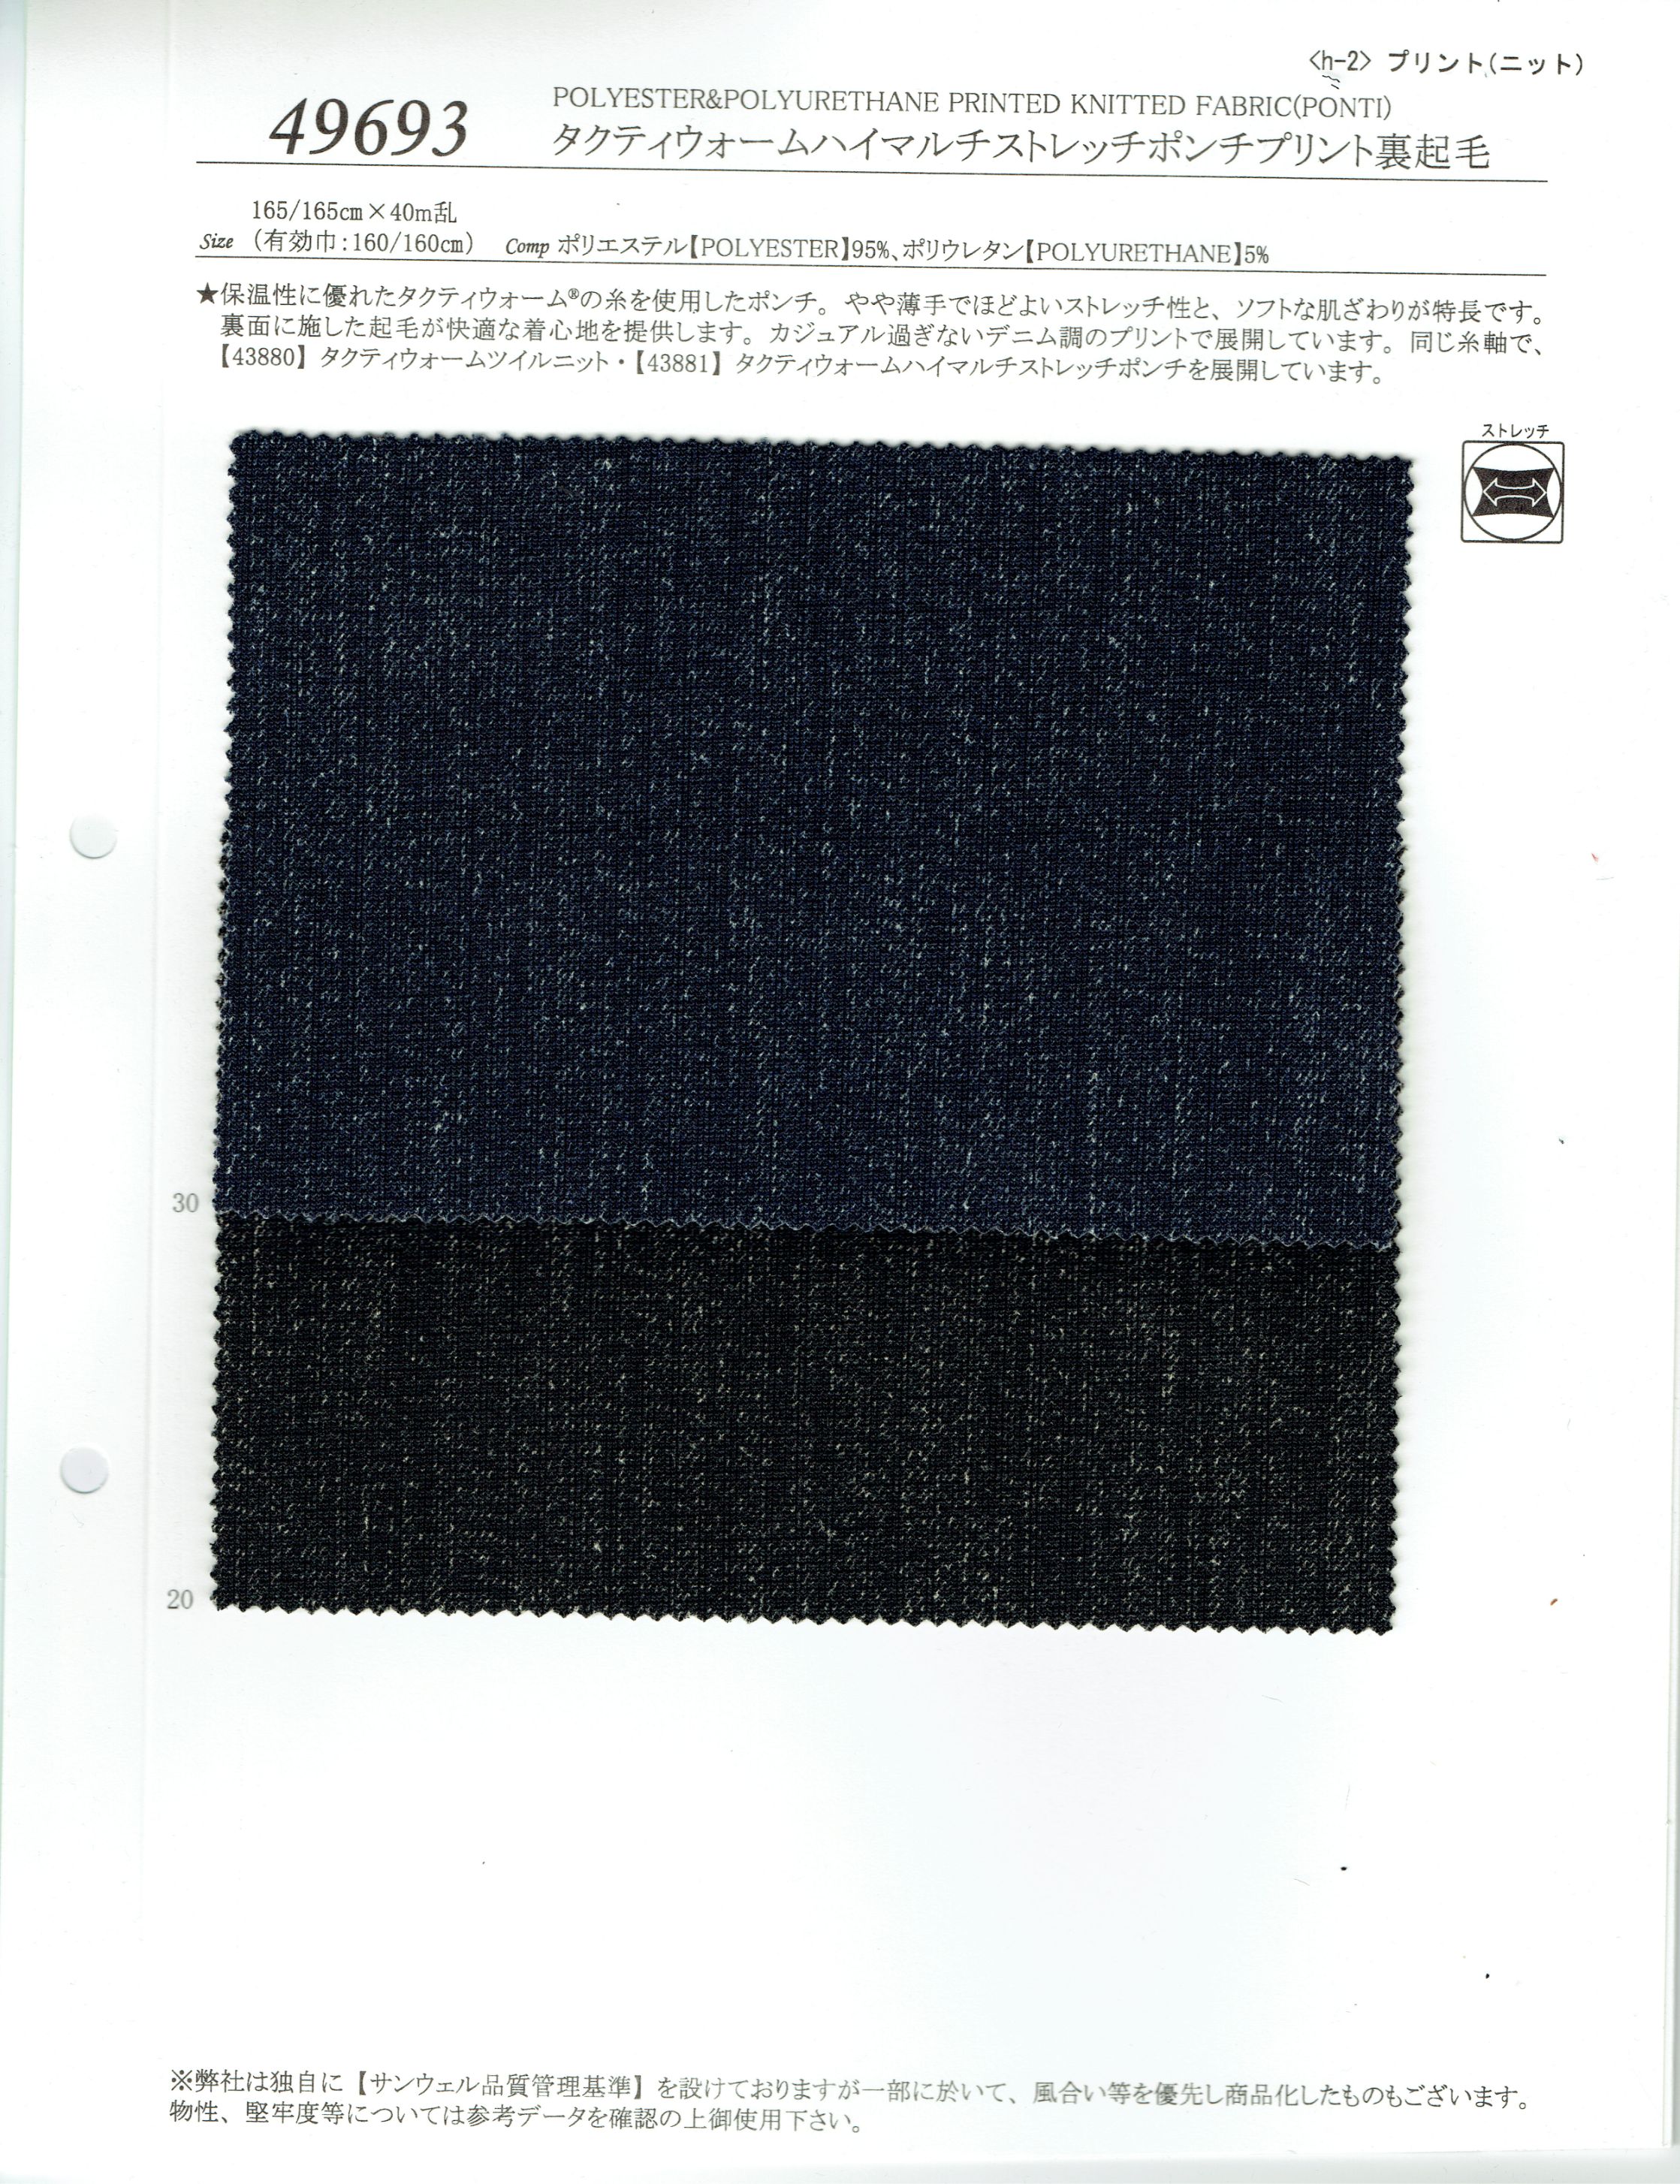 View POLYESTER95/POLYURETHANE5 PRINTED KNITTED FABRIC[PONTI] PRINTED KNITTED FABRIC[PONTI]